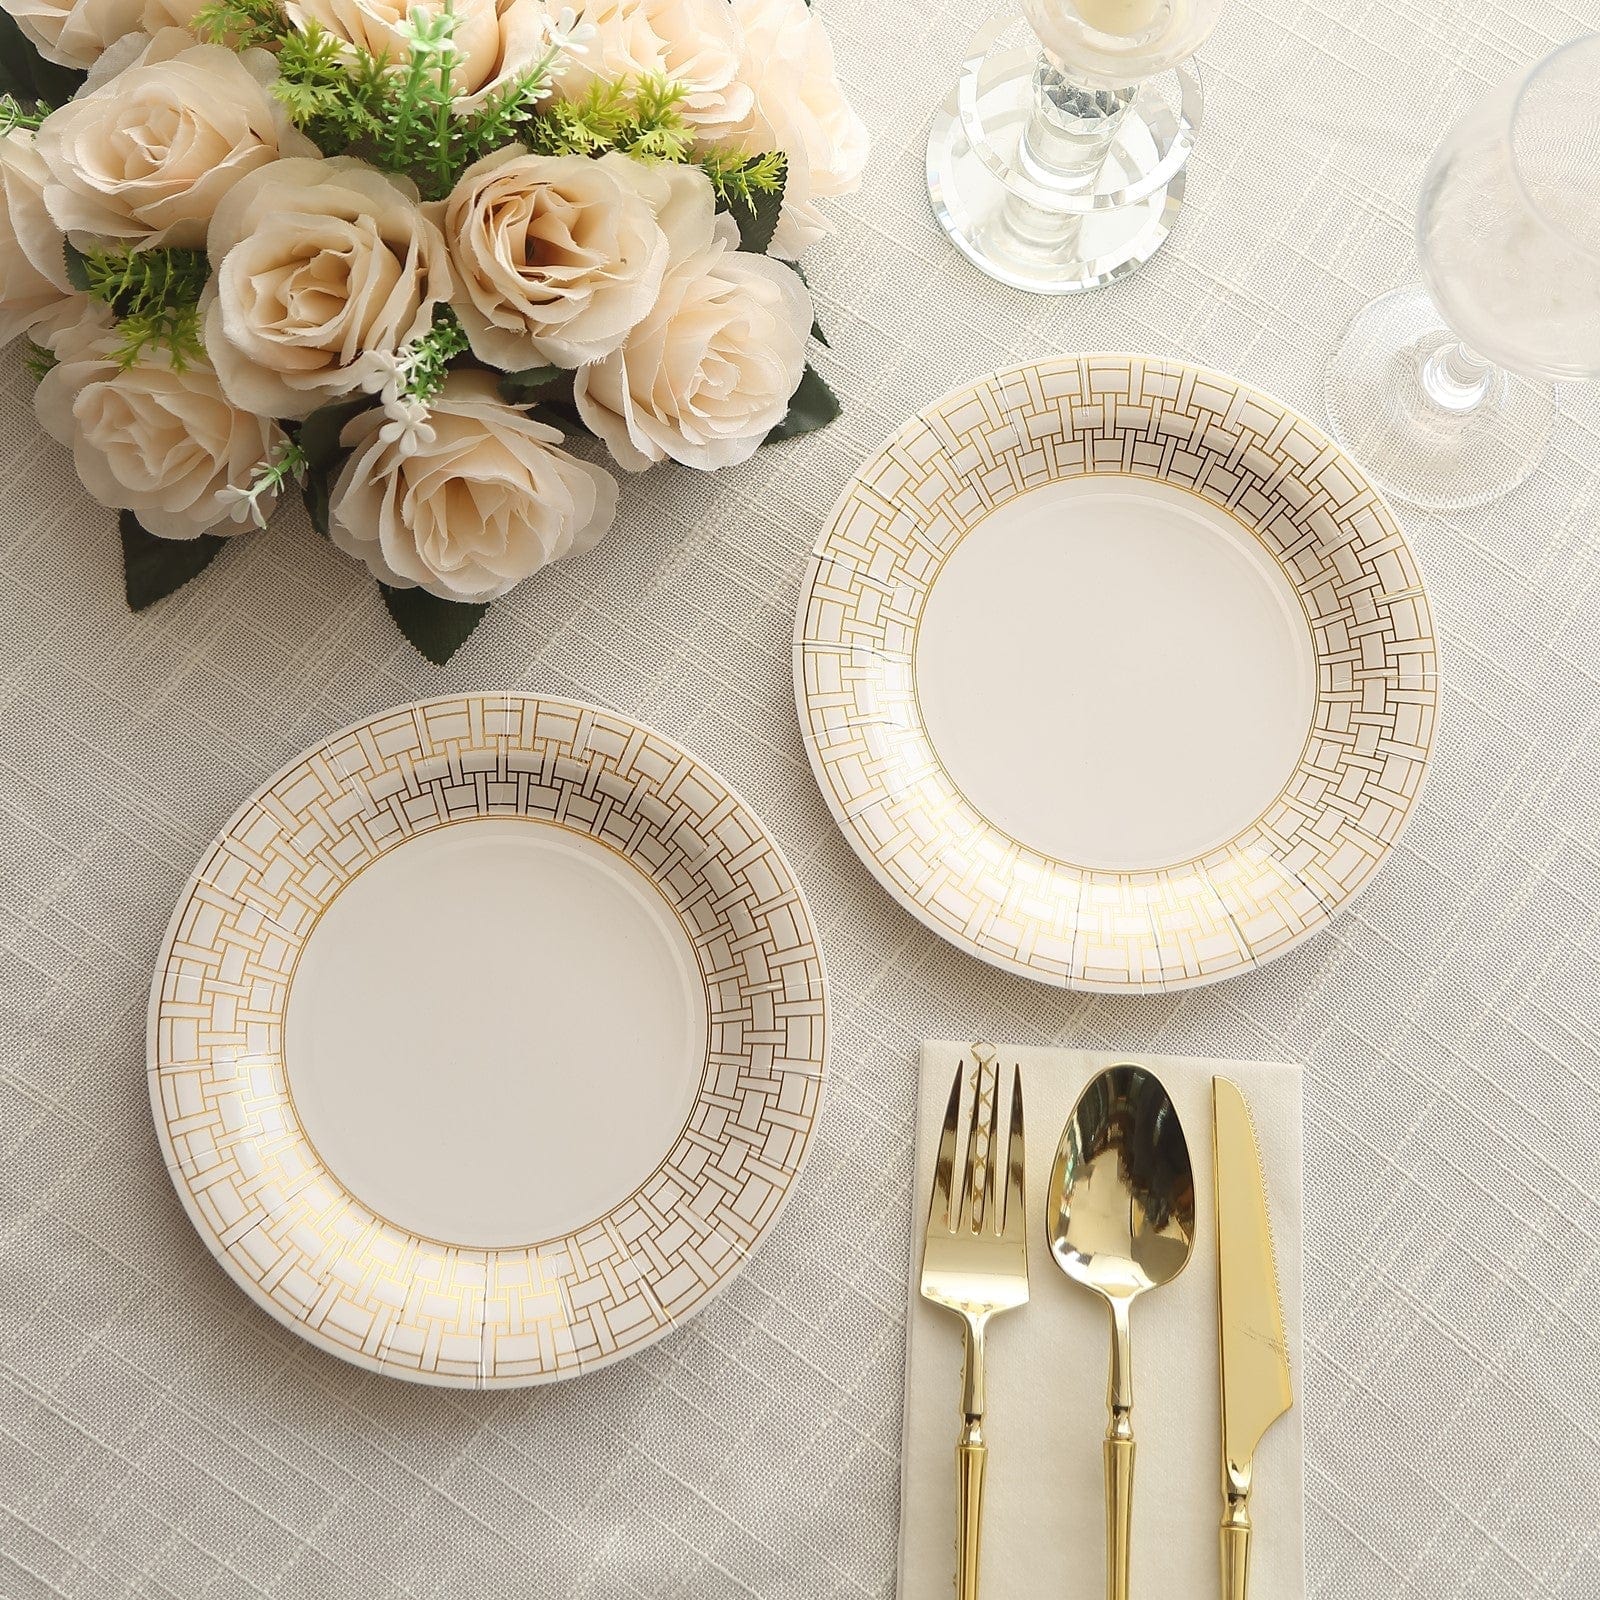 25 Dinner Paper Plates with Gold Basketweave Pattern Rim